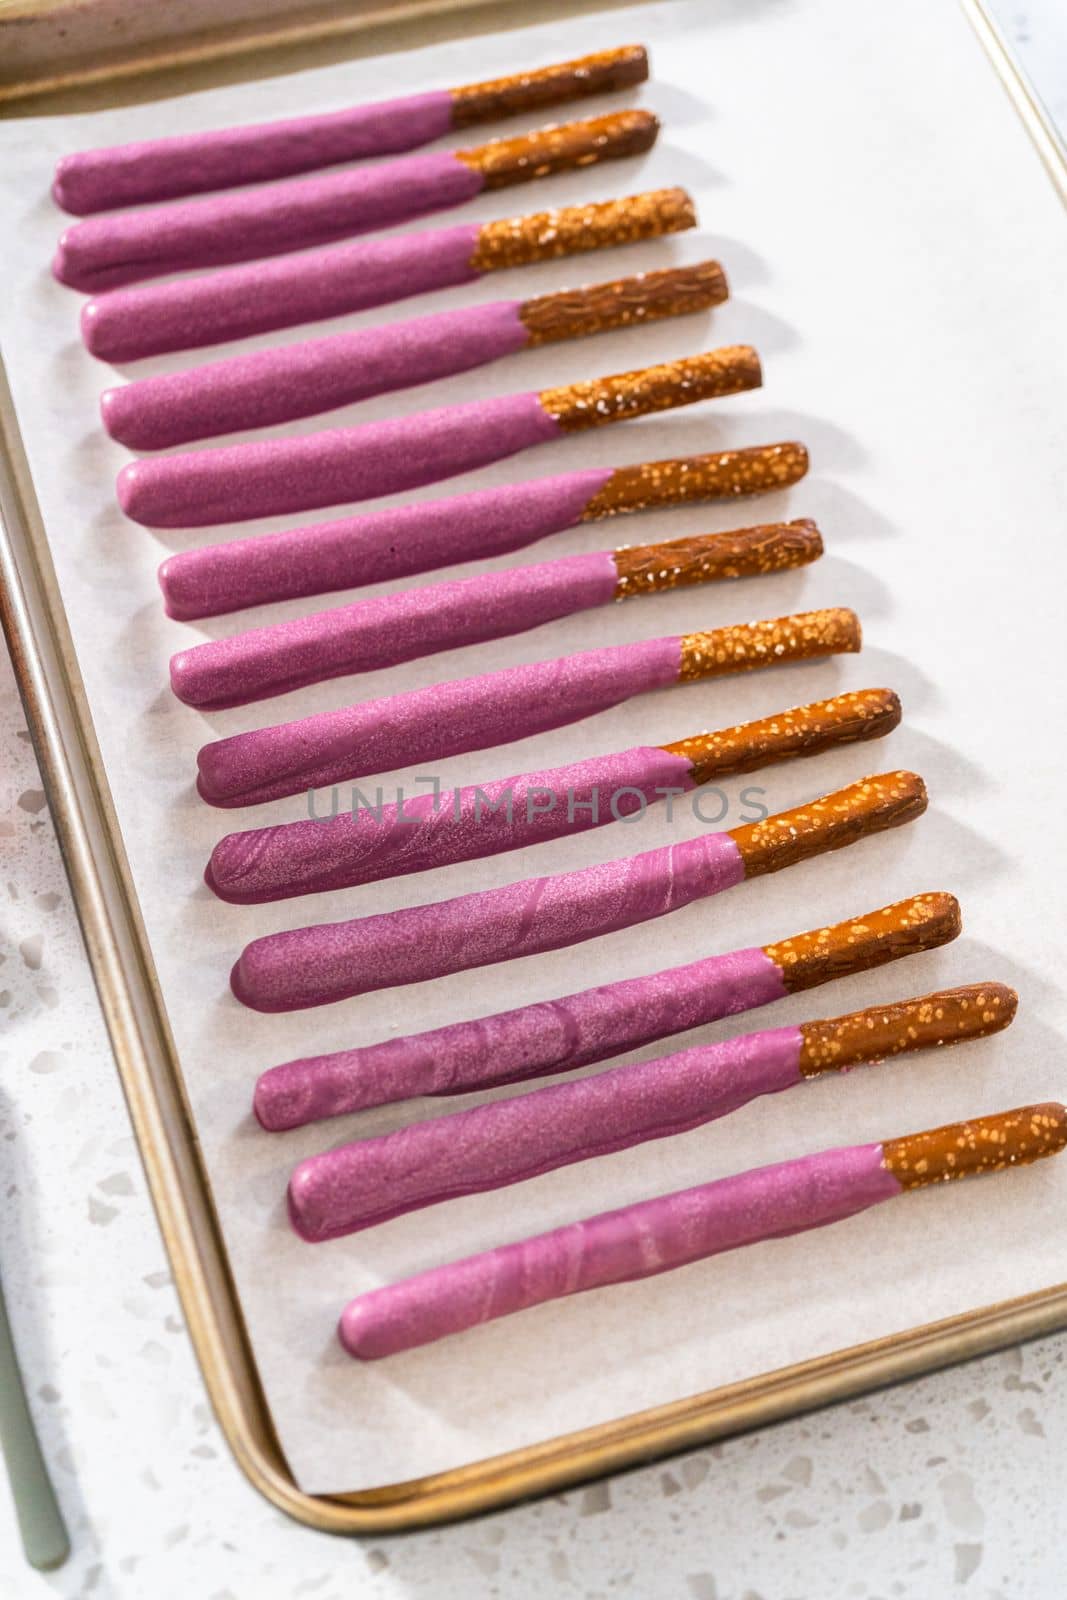 Halloween chocolate-covered pretzel rods by arinahabich